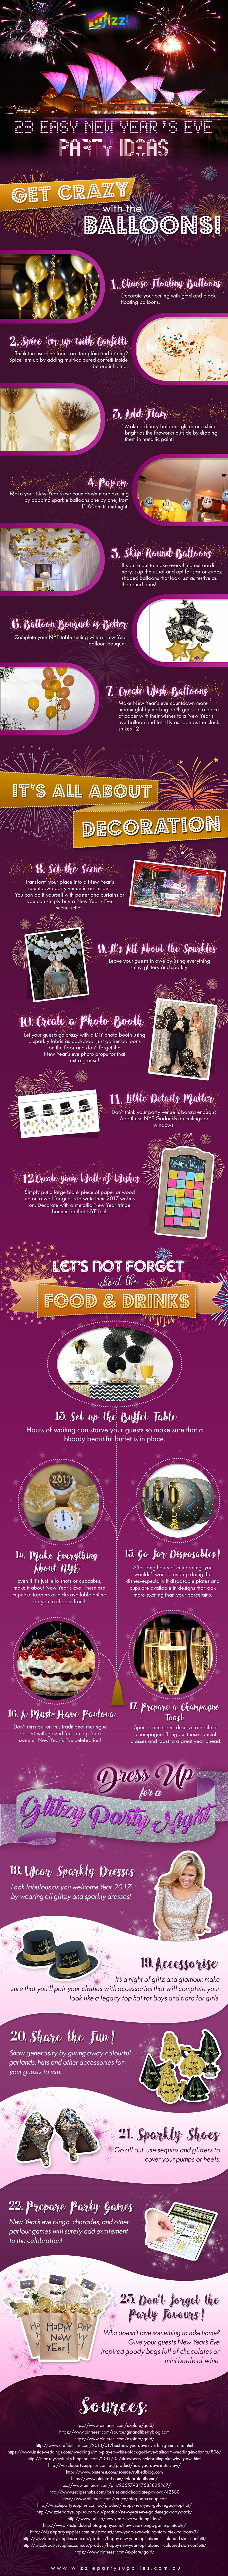 23 Easy New Year's Eve Party Ideas